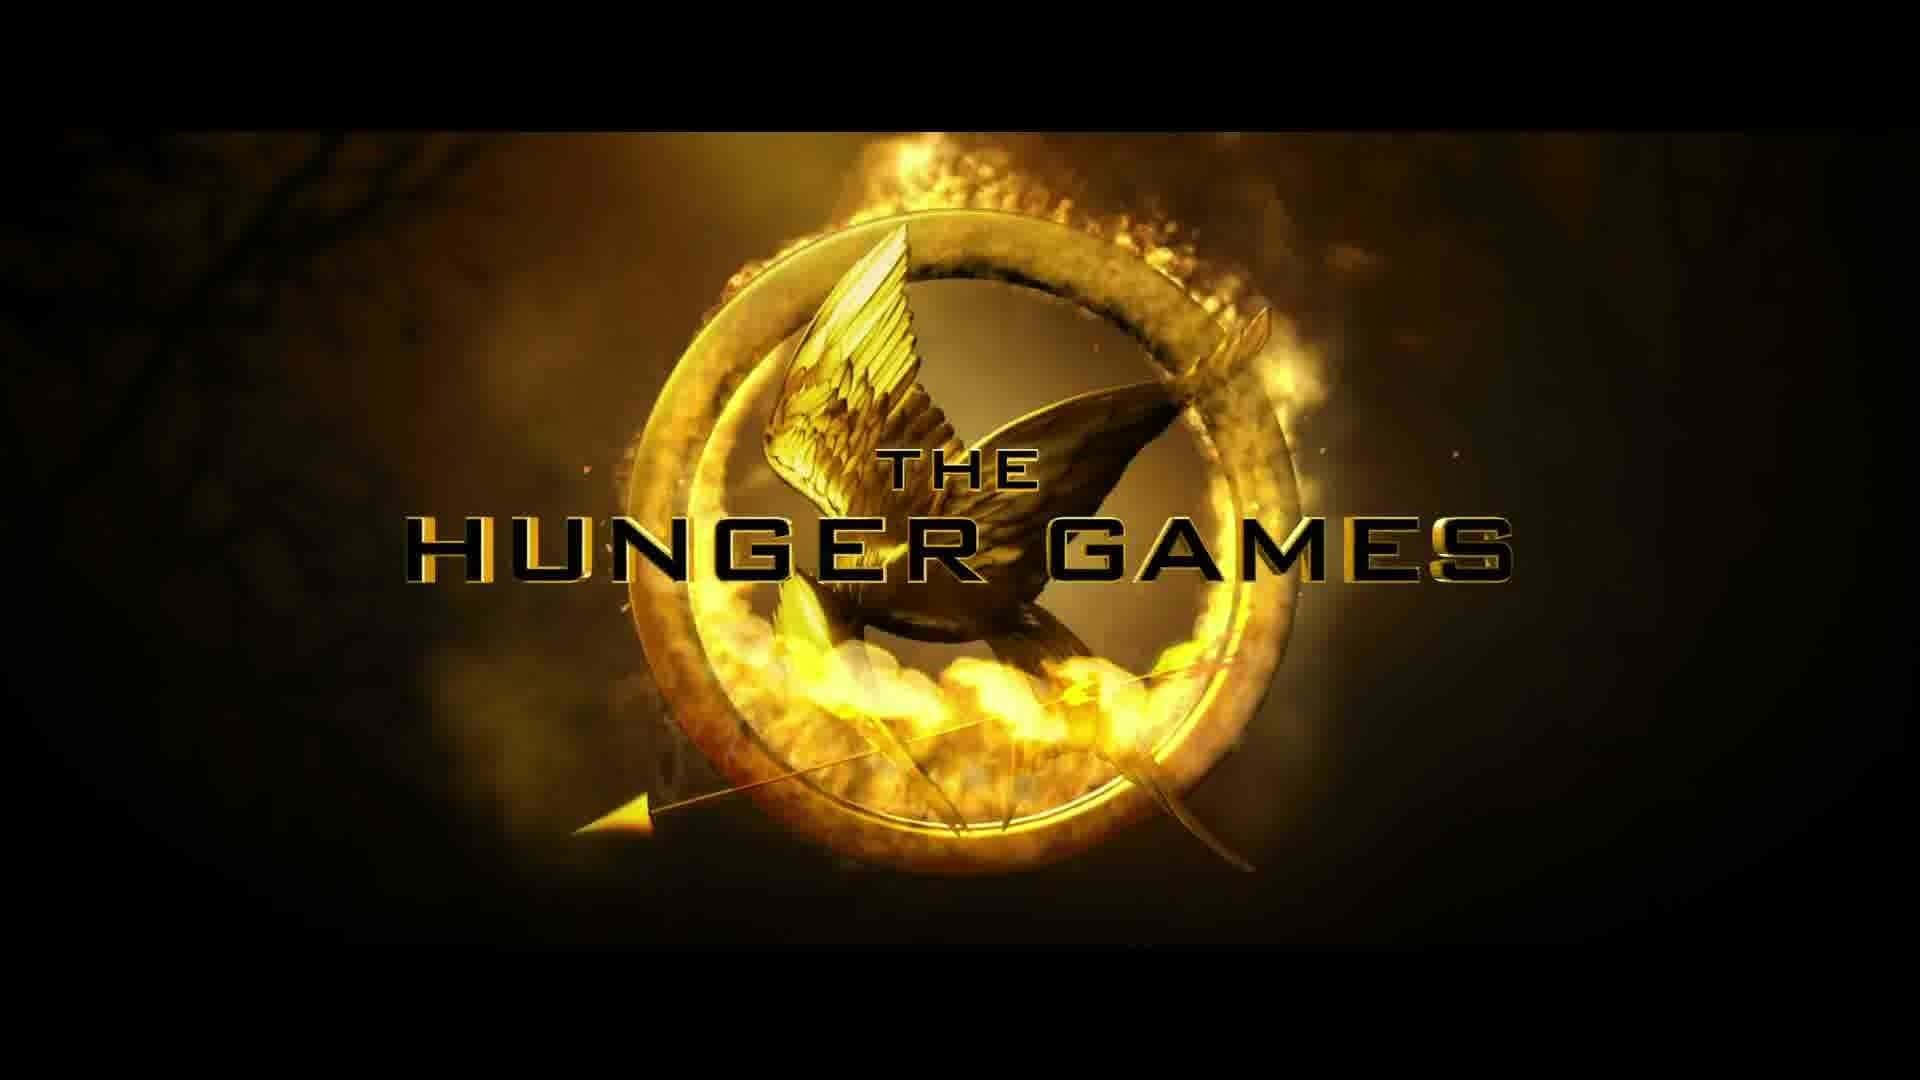 The Hunger Games Logo With Fire